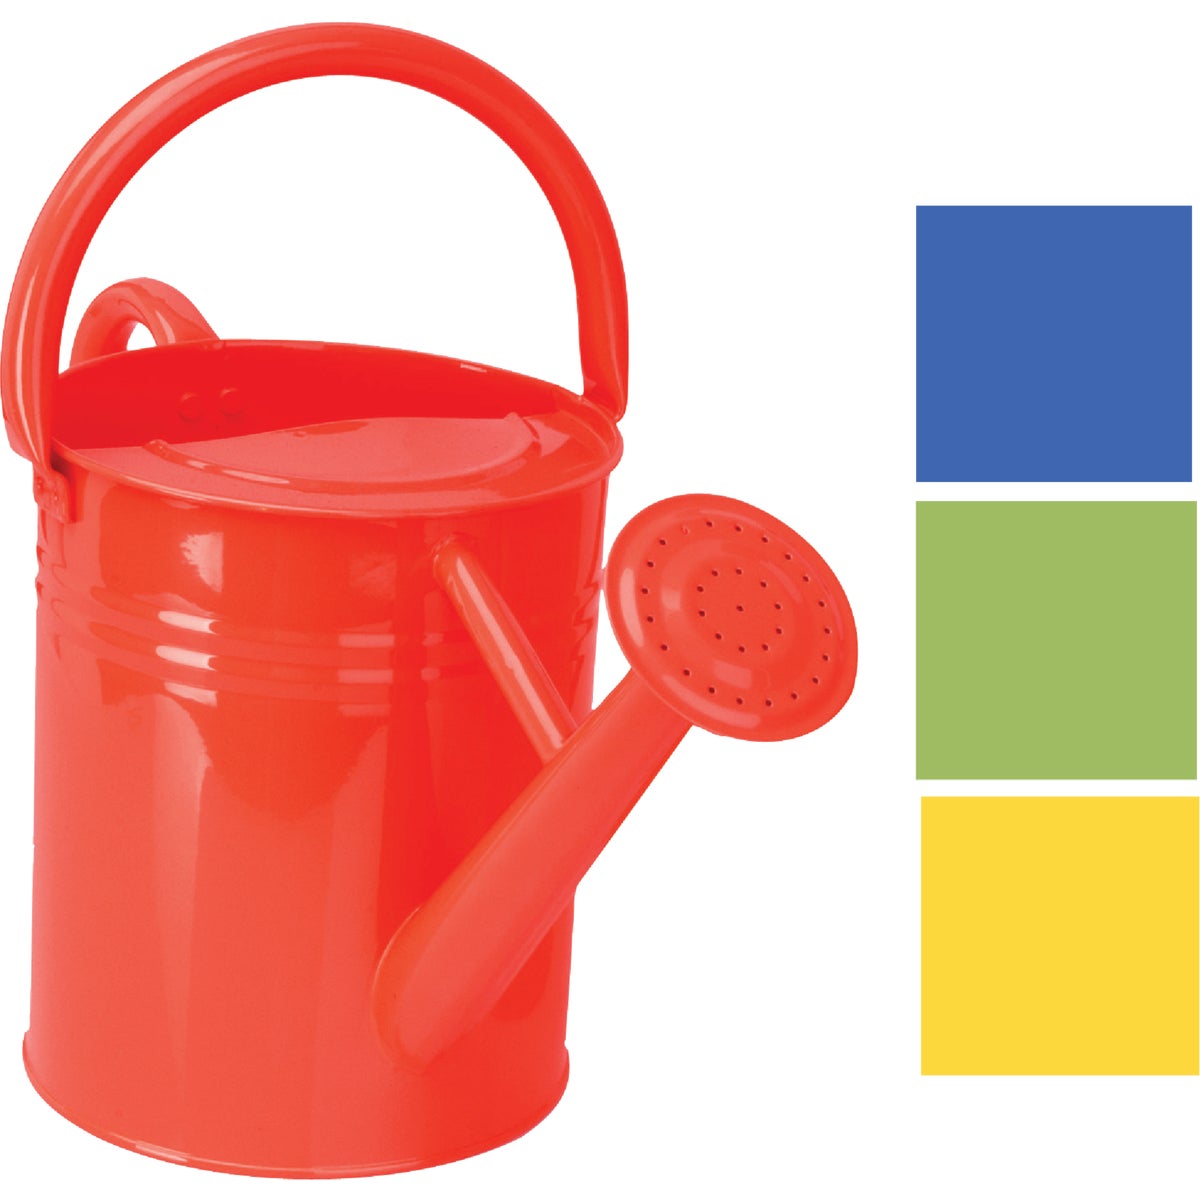 Item 704270, Traditional watering can in assorted primary colors.